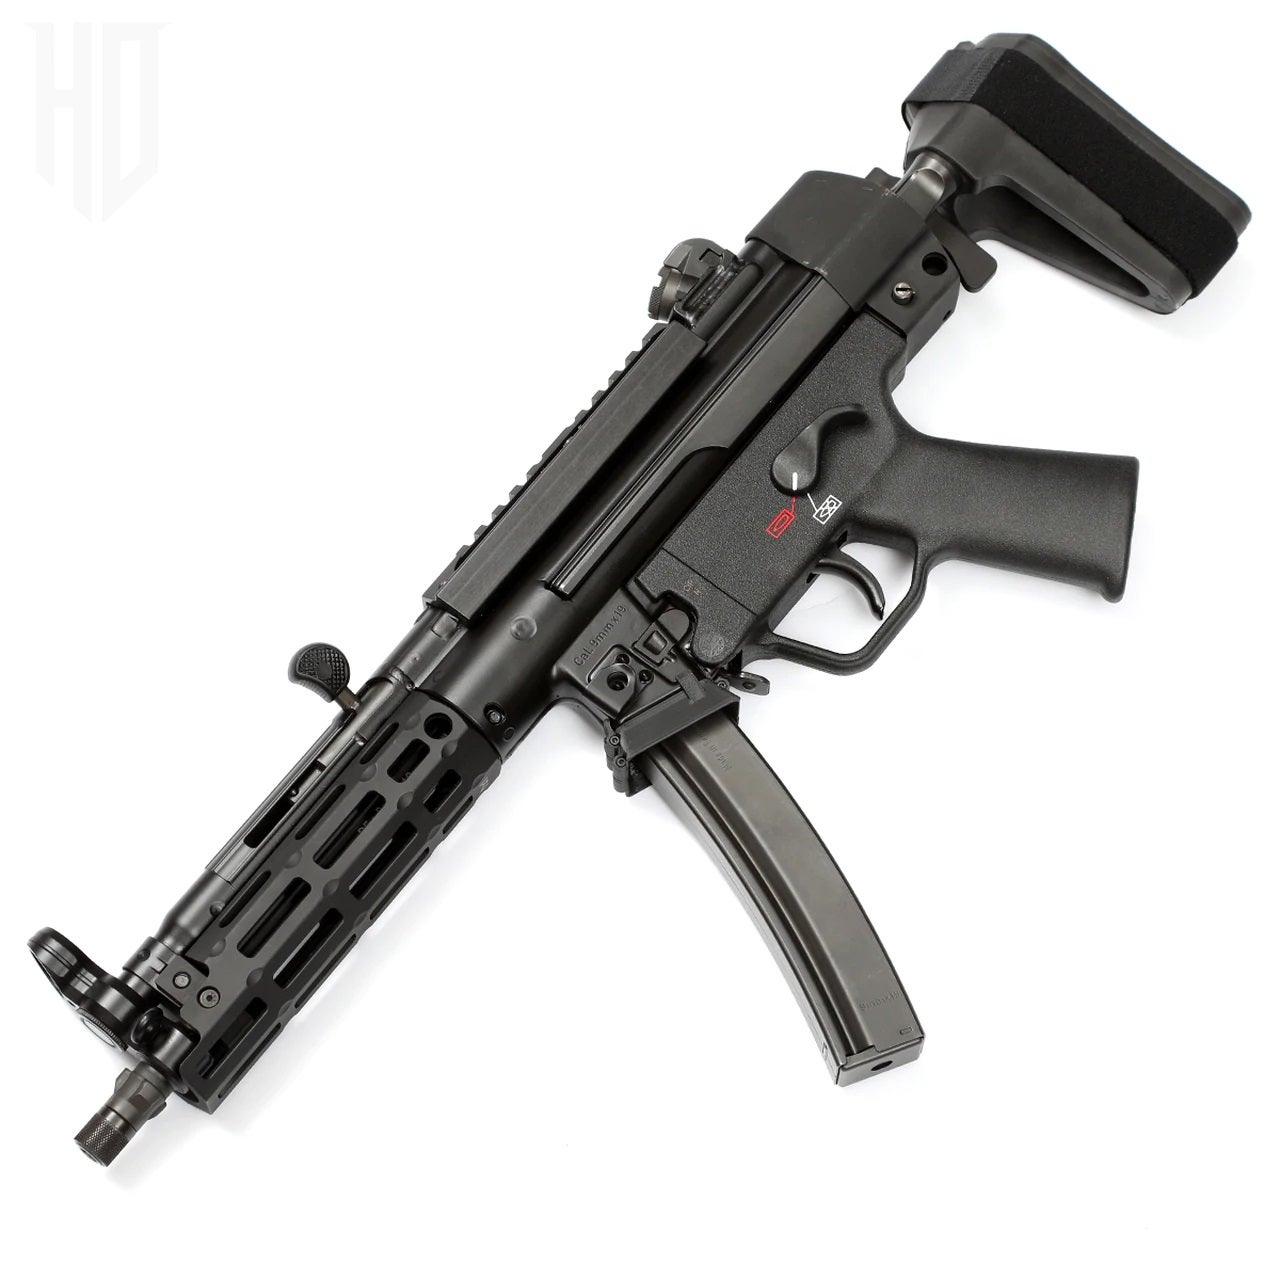 New MP5 Flared Magwell Adapter Coming Soon from Haga Defense